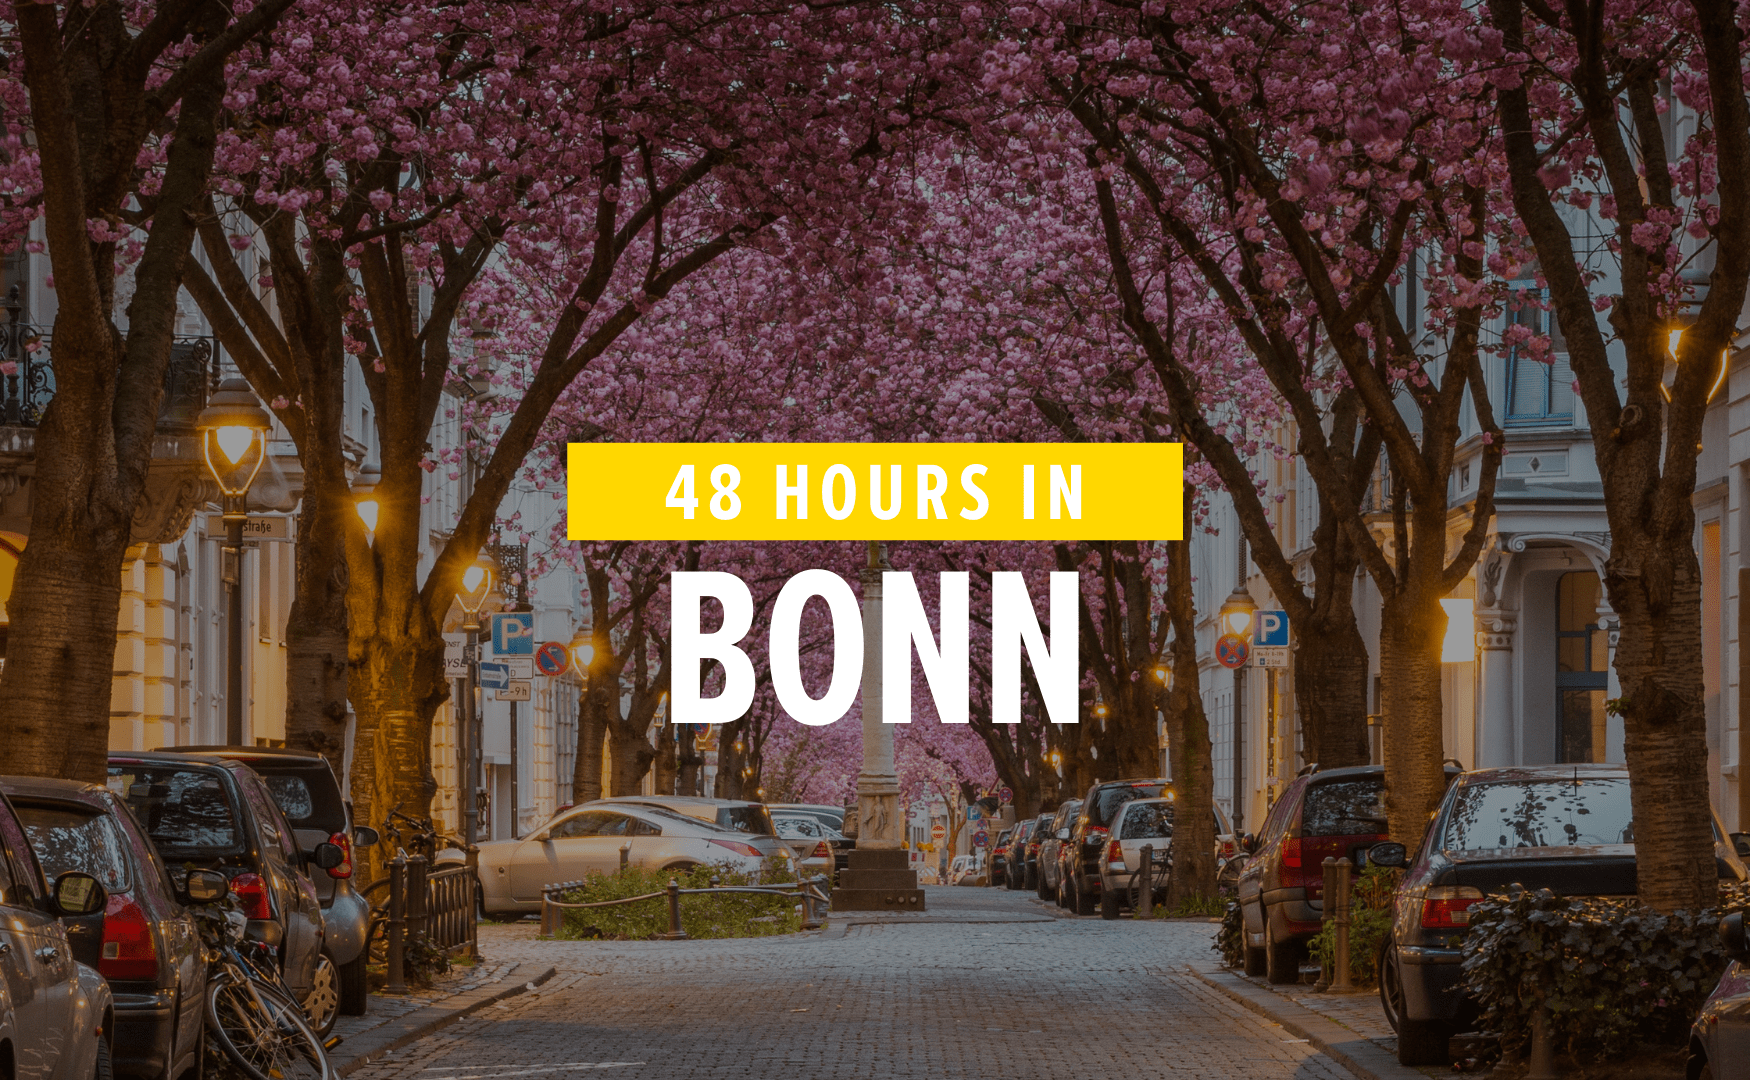 What you should not miss in Bonn? The cherry blossom!